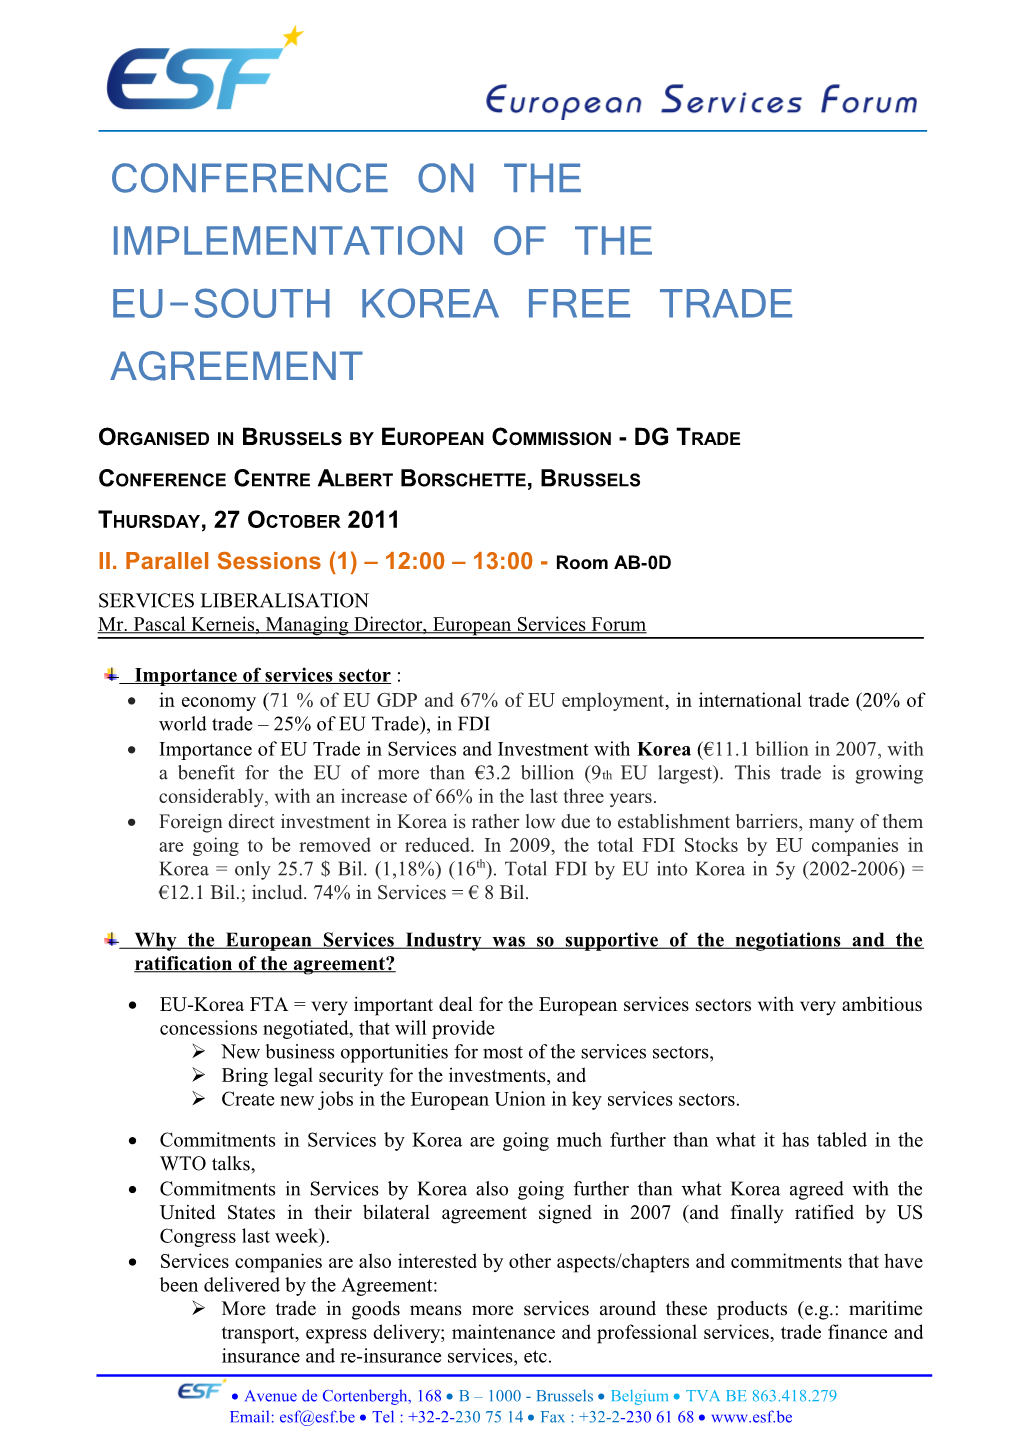 Organised in Brussels by European Commission - DG Trade